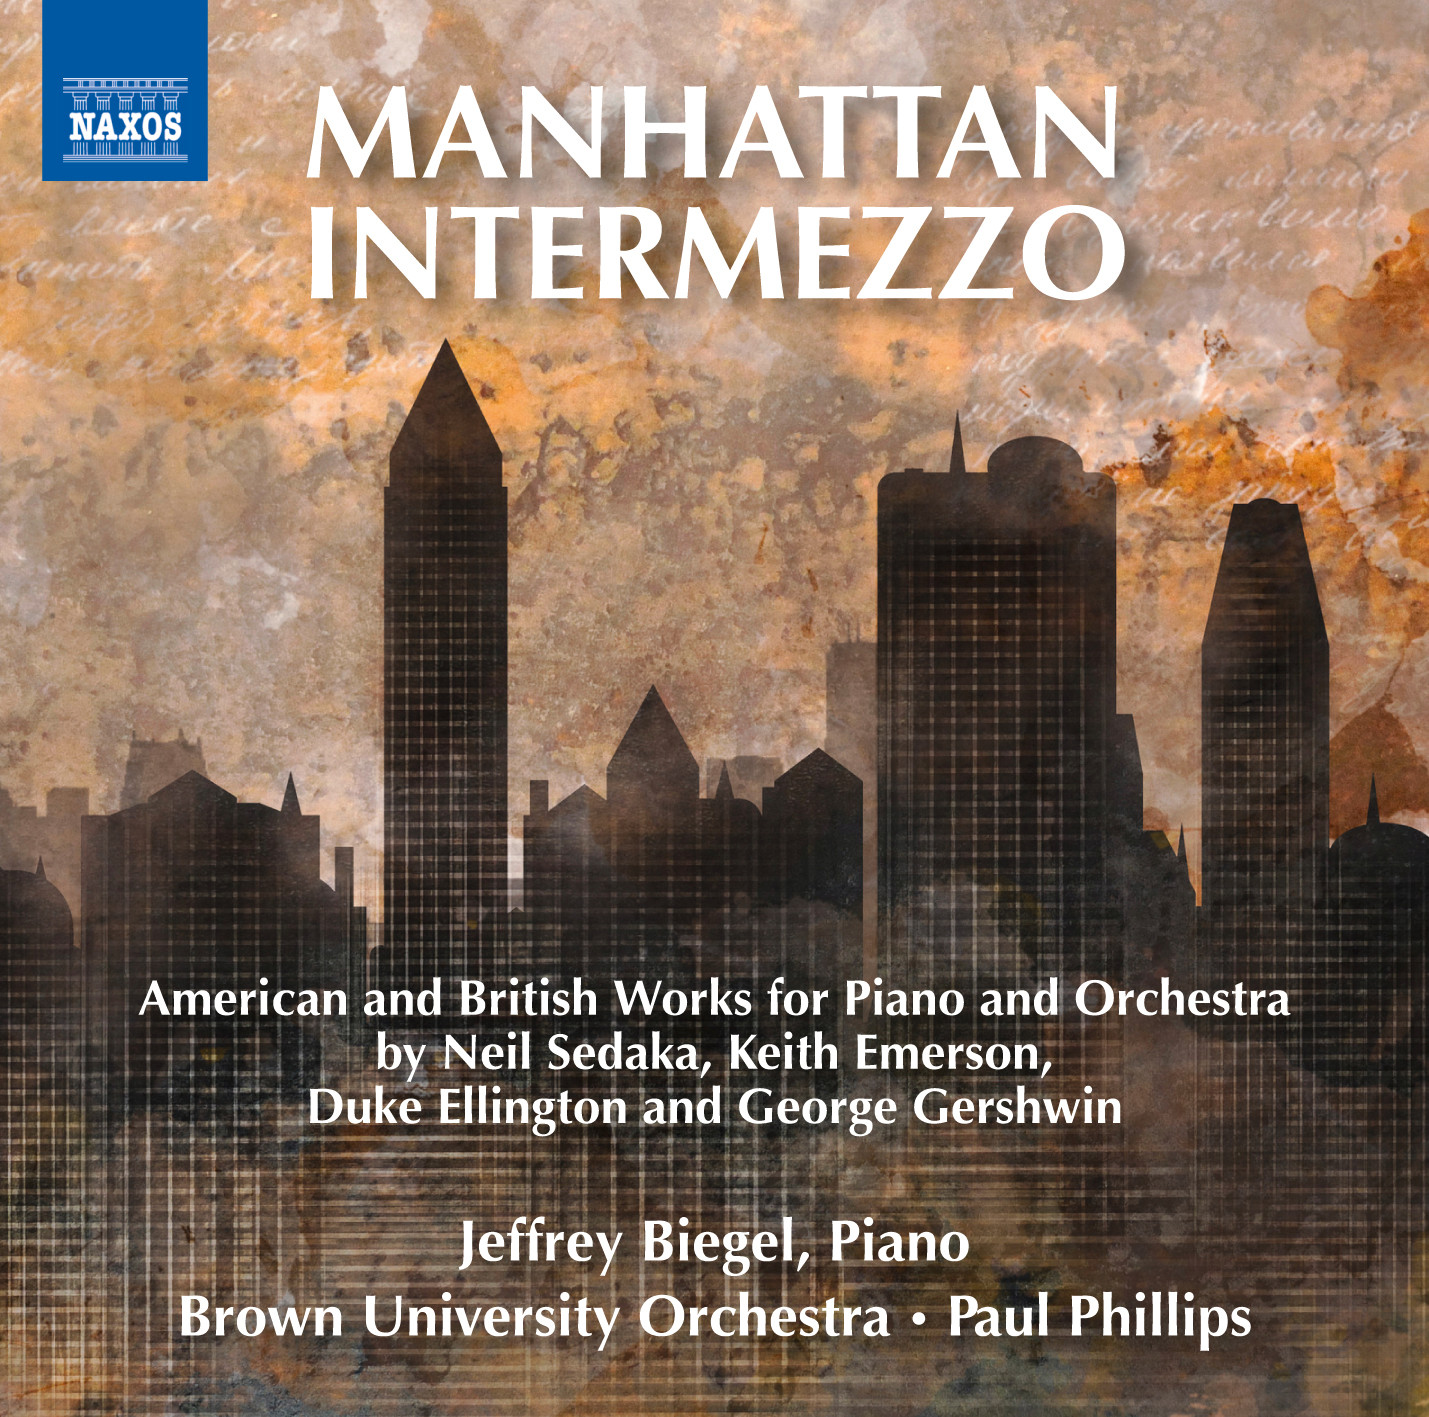 Manhattan Intermezzo, a CD recorded by pianist Jeffrey Biegel and the Brown University Orchestra, conducted by Professor Paul Phillips, was released on Jan. 8 and is available for purchase on Amazon.com. The CD features compositions by musicians and composers Neil Sedaka, Keith Emerson, Duke Ellington, and George Gershwin.